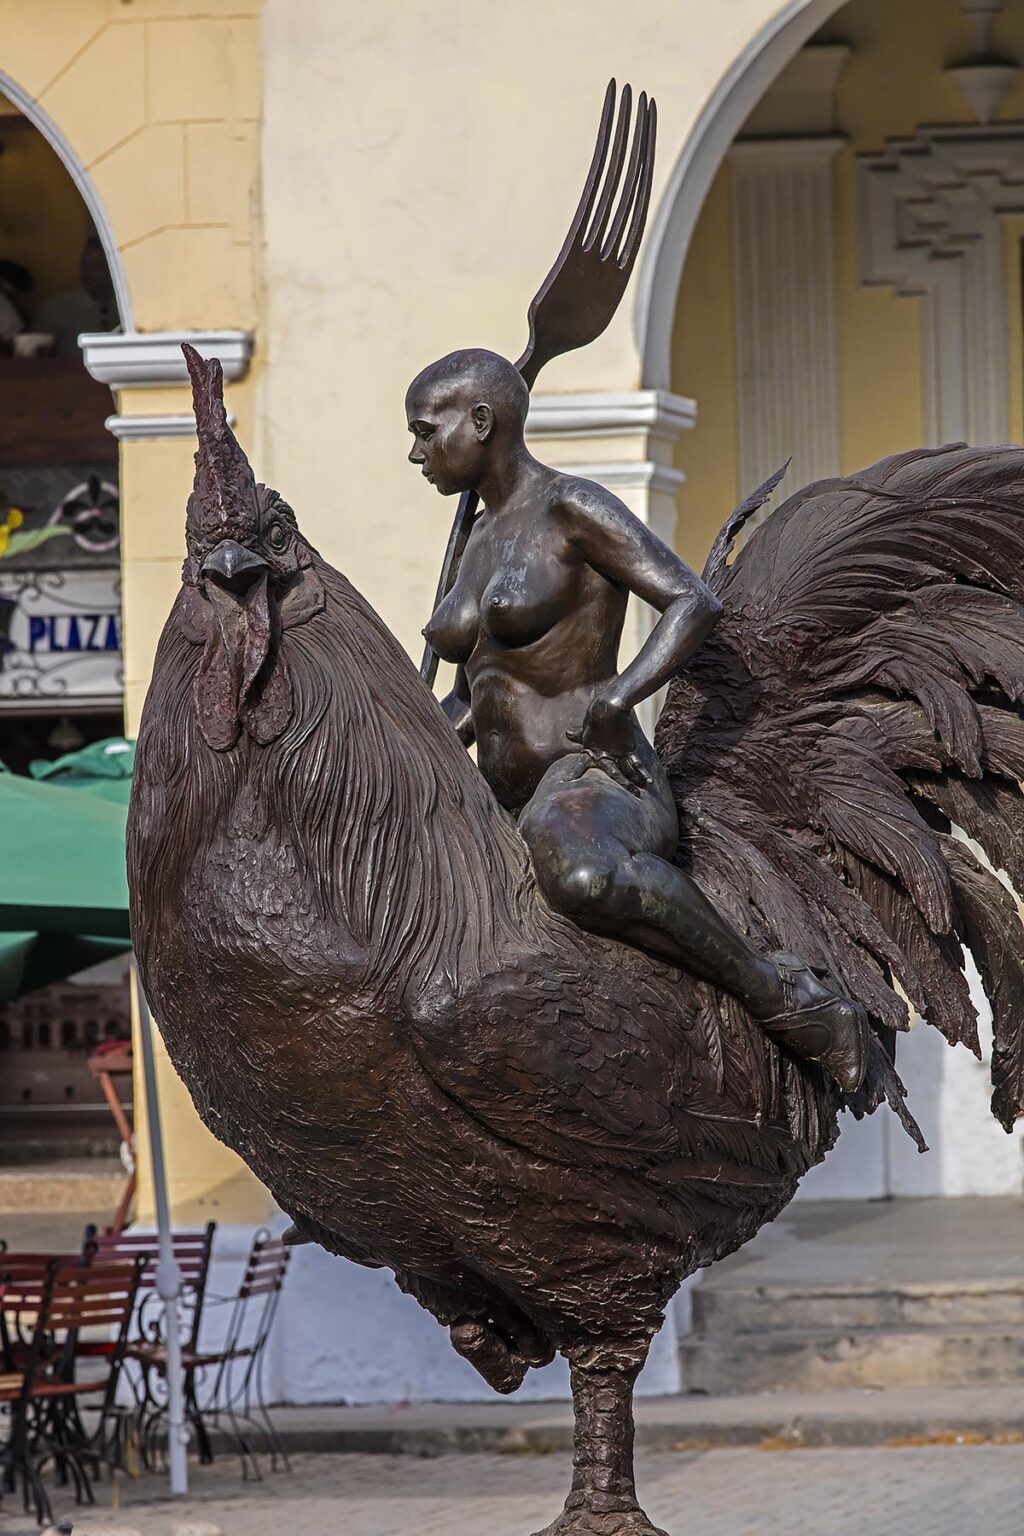 Sculpture of a nude woman riding a rooster in the PLAZA VIEJA of Old Habana - HAVANA, CUBA